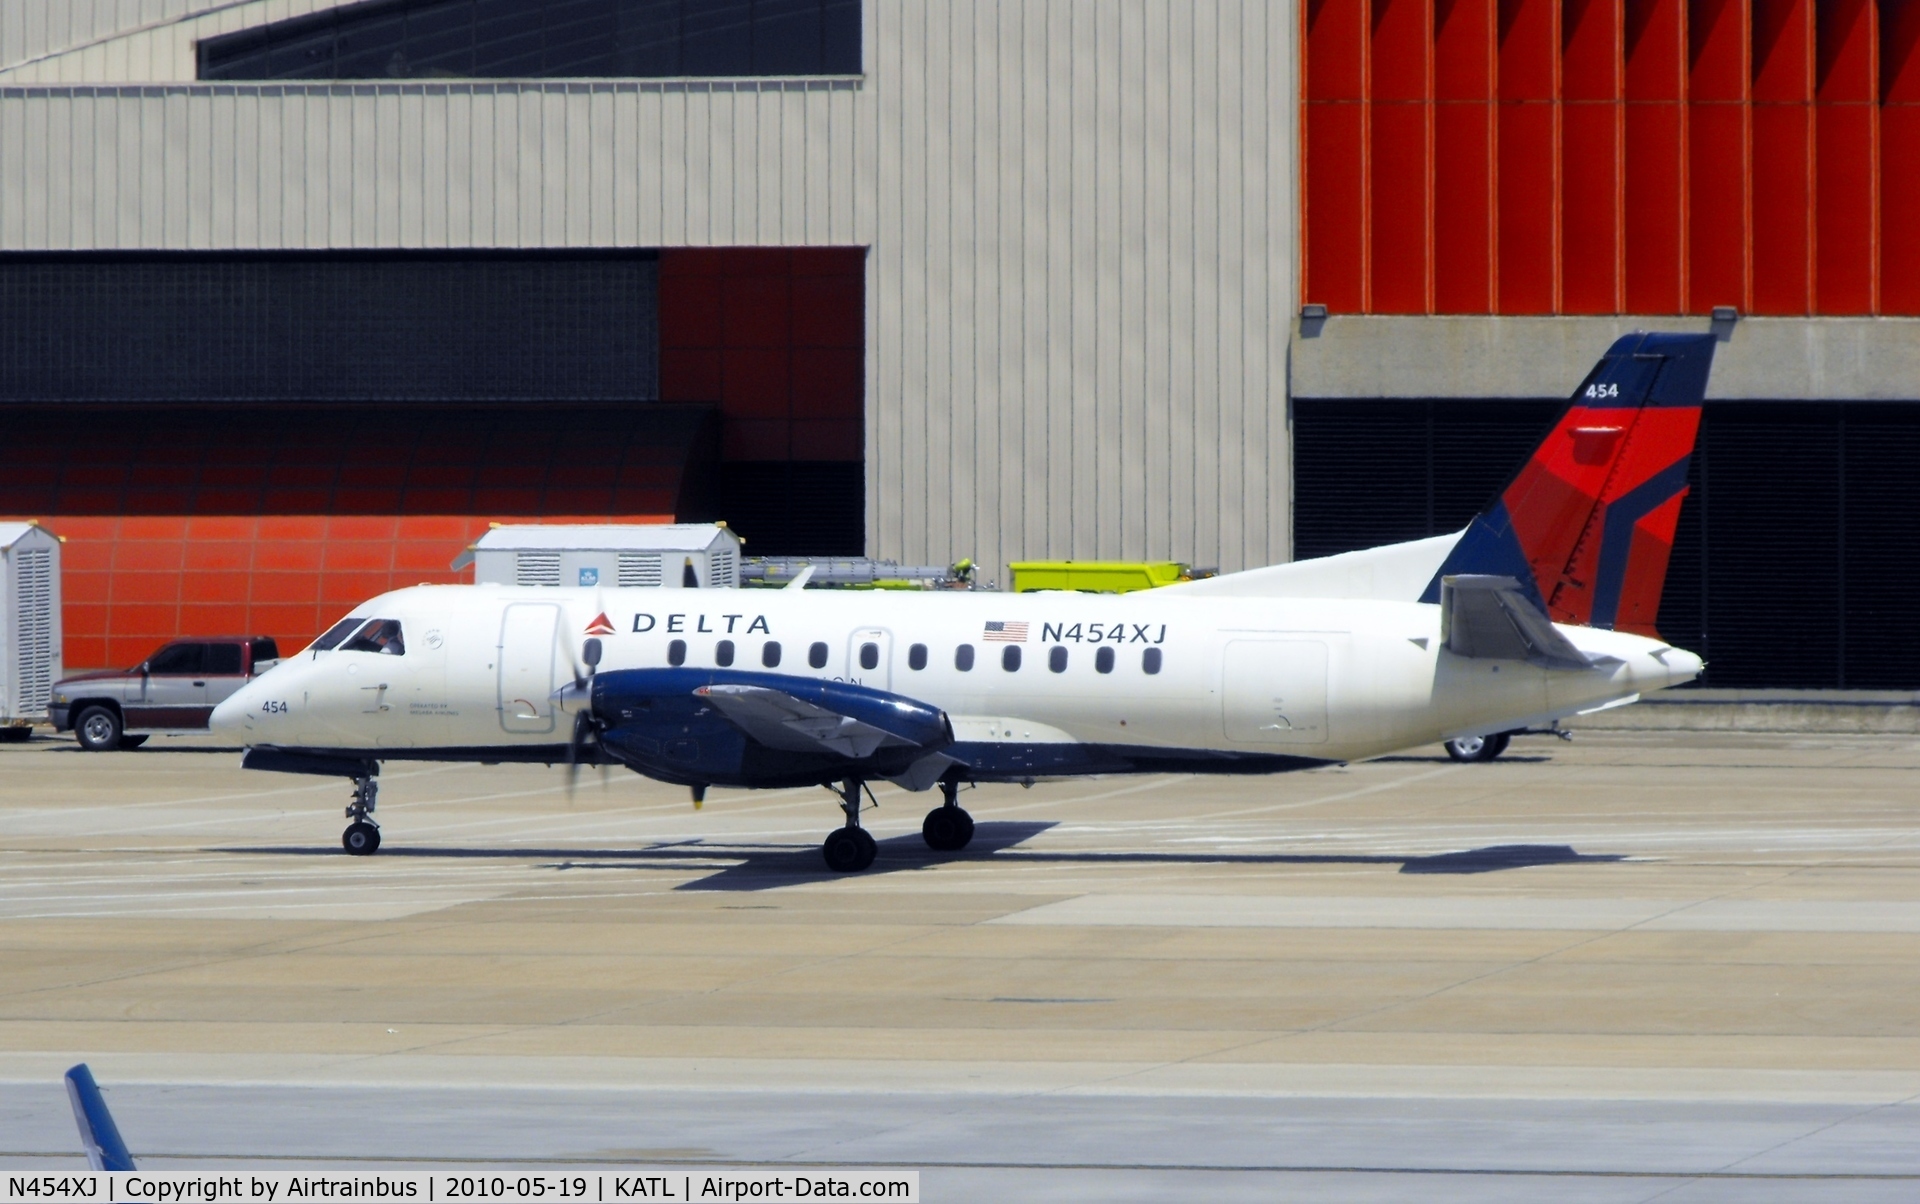 N454XJ, 1998 Saab 340B C/N 340B-454, Delta Connection, operated by Mesaba Airlines Saab 340.